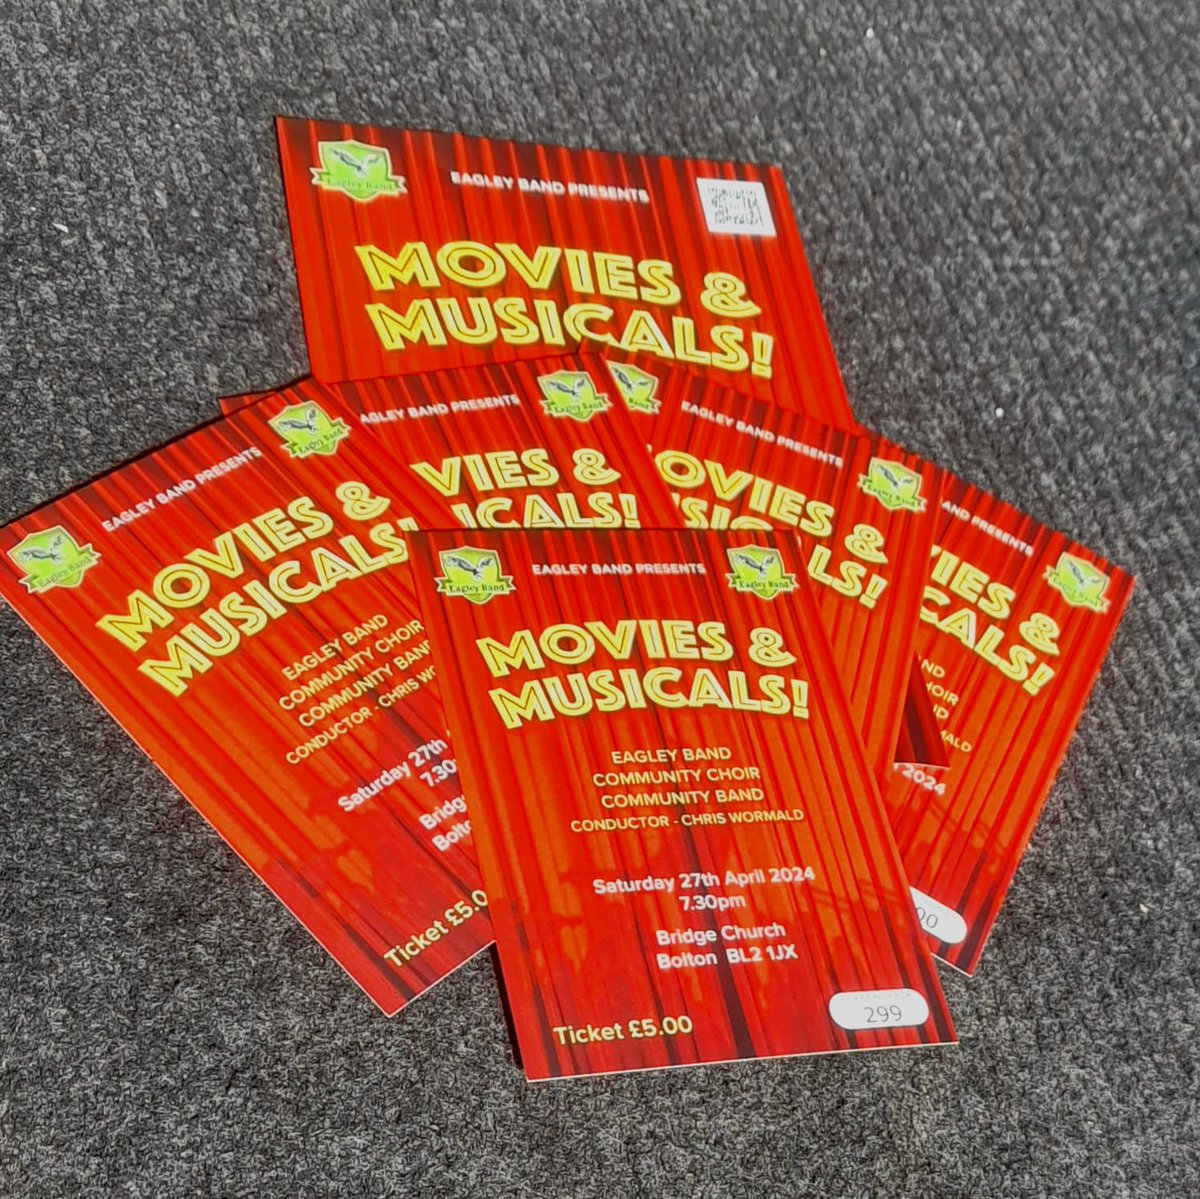 Tickets are now on sale from Booth's Music for the Eagley Band 'Movies and Musicals' extravaganza that is taking place on Saturday 27th April. Call down to collect yours any time, just £5.00 each. #brassband #eagleyband #livemusic #bolton @eagleybrassband